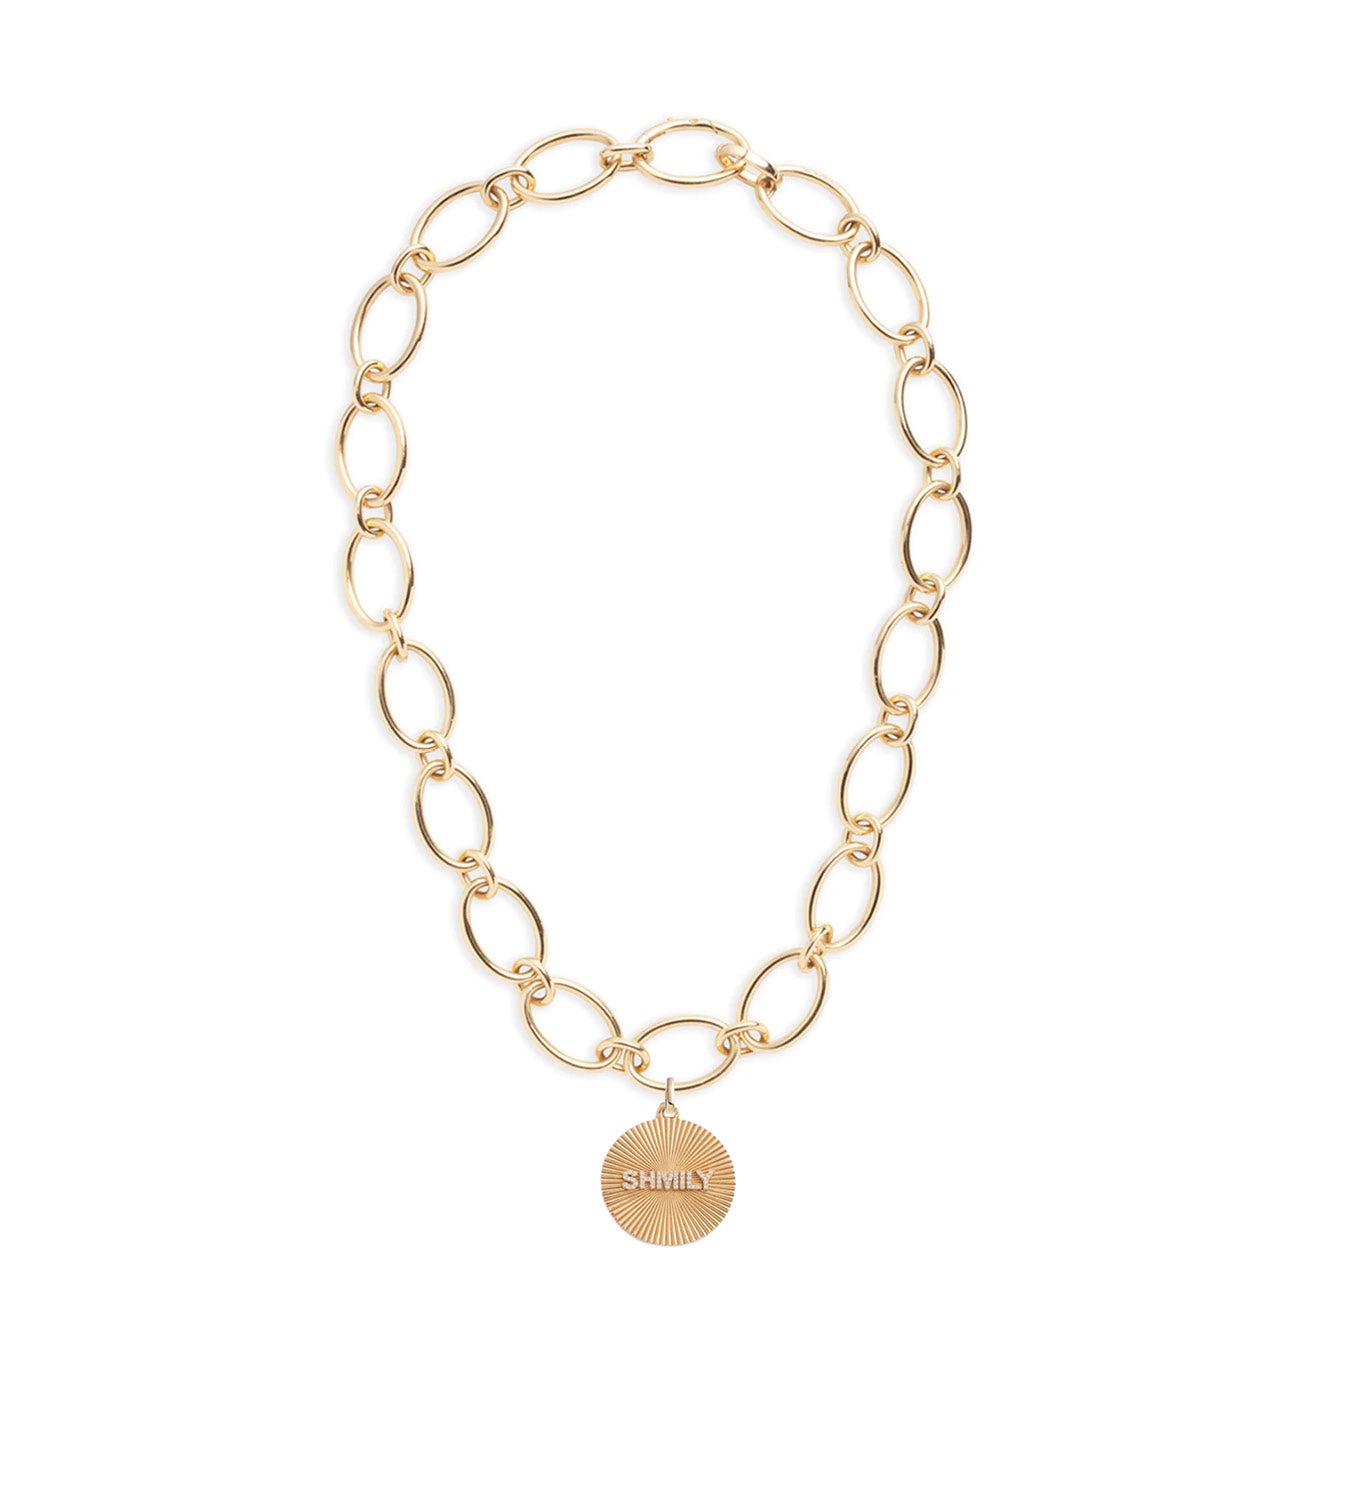 Custom Centered Clean Edge Love Token : Oval Link Chain Necklace